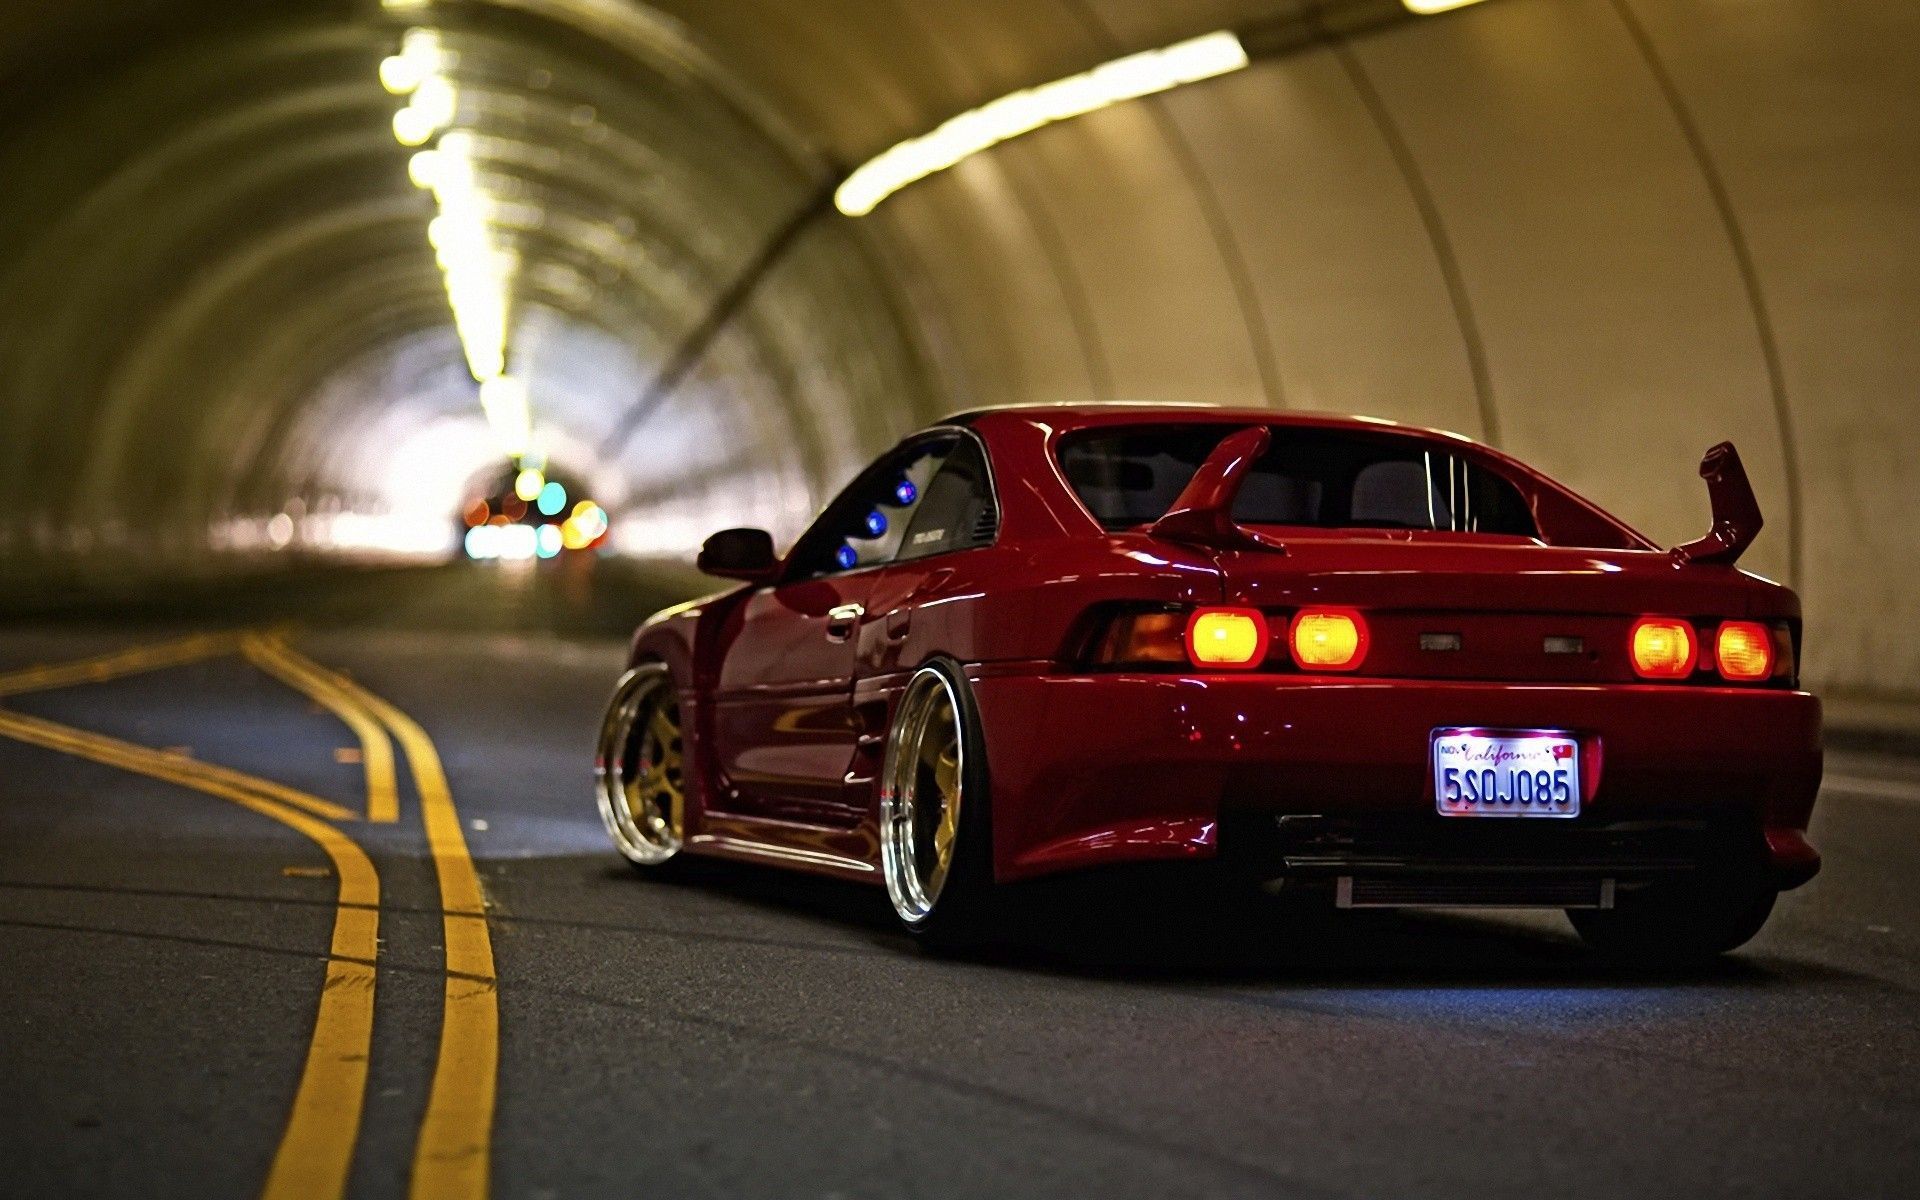 Acura Integra Wallpapers Group (76+)